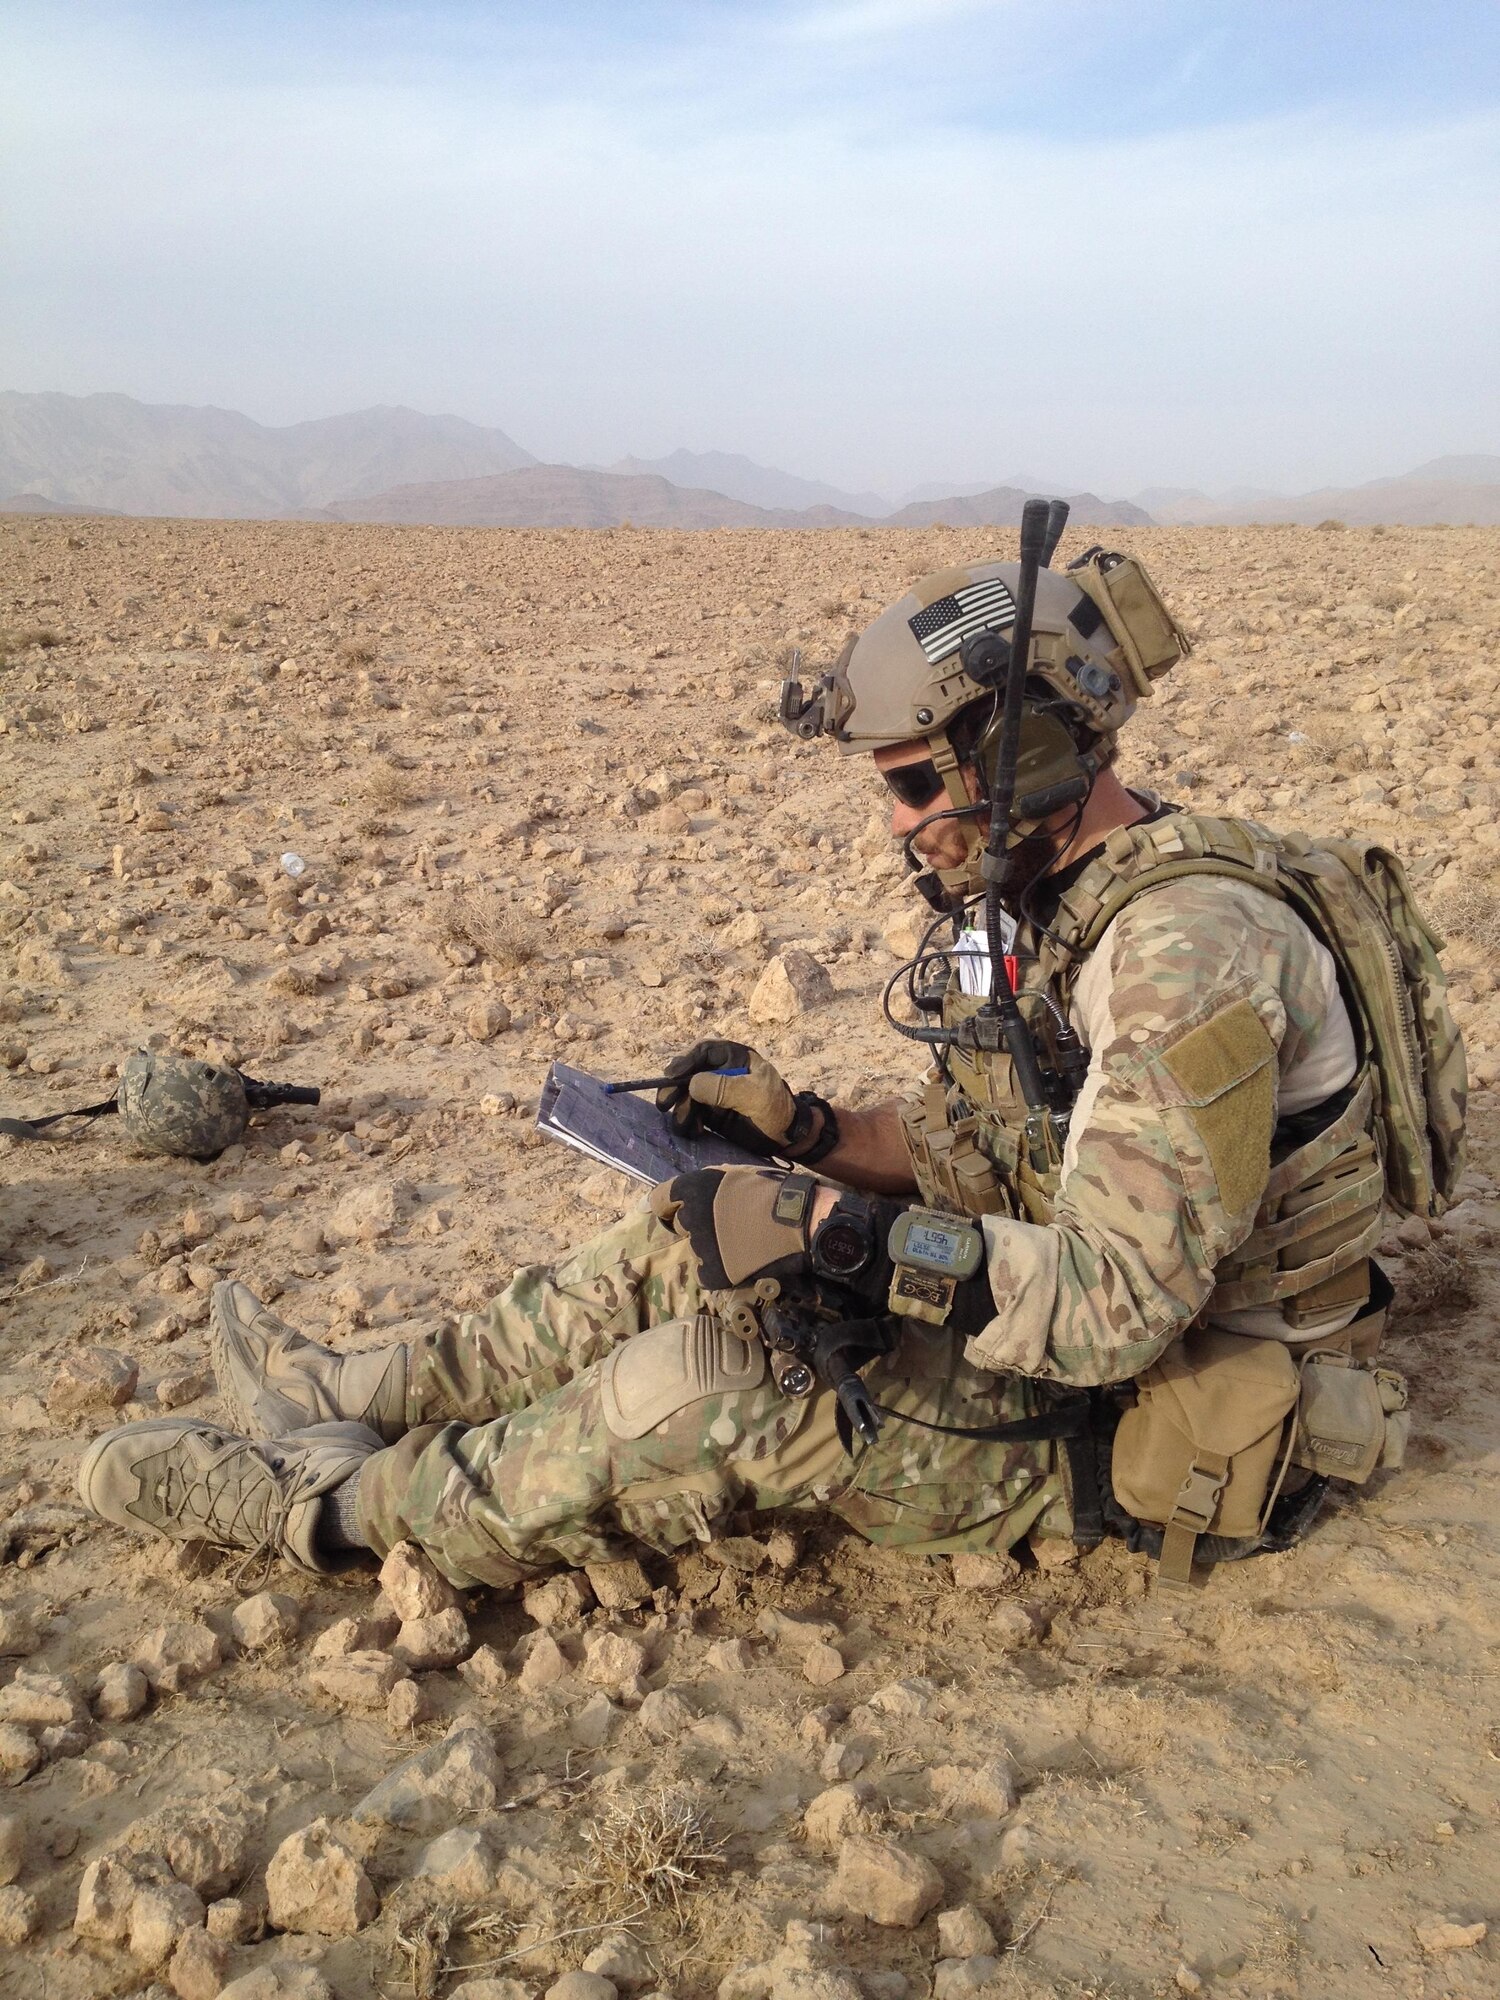 Staff Sgt. Travis Jordan, 320th Special Tactics Squadron combat controller, relays friendly positions to aircraft during a mission in Afghanistan Dec. 19, 2014. Jordan is one of the 12 Outstanding Airmen of the Year for 2015. (Courtesy photo)